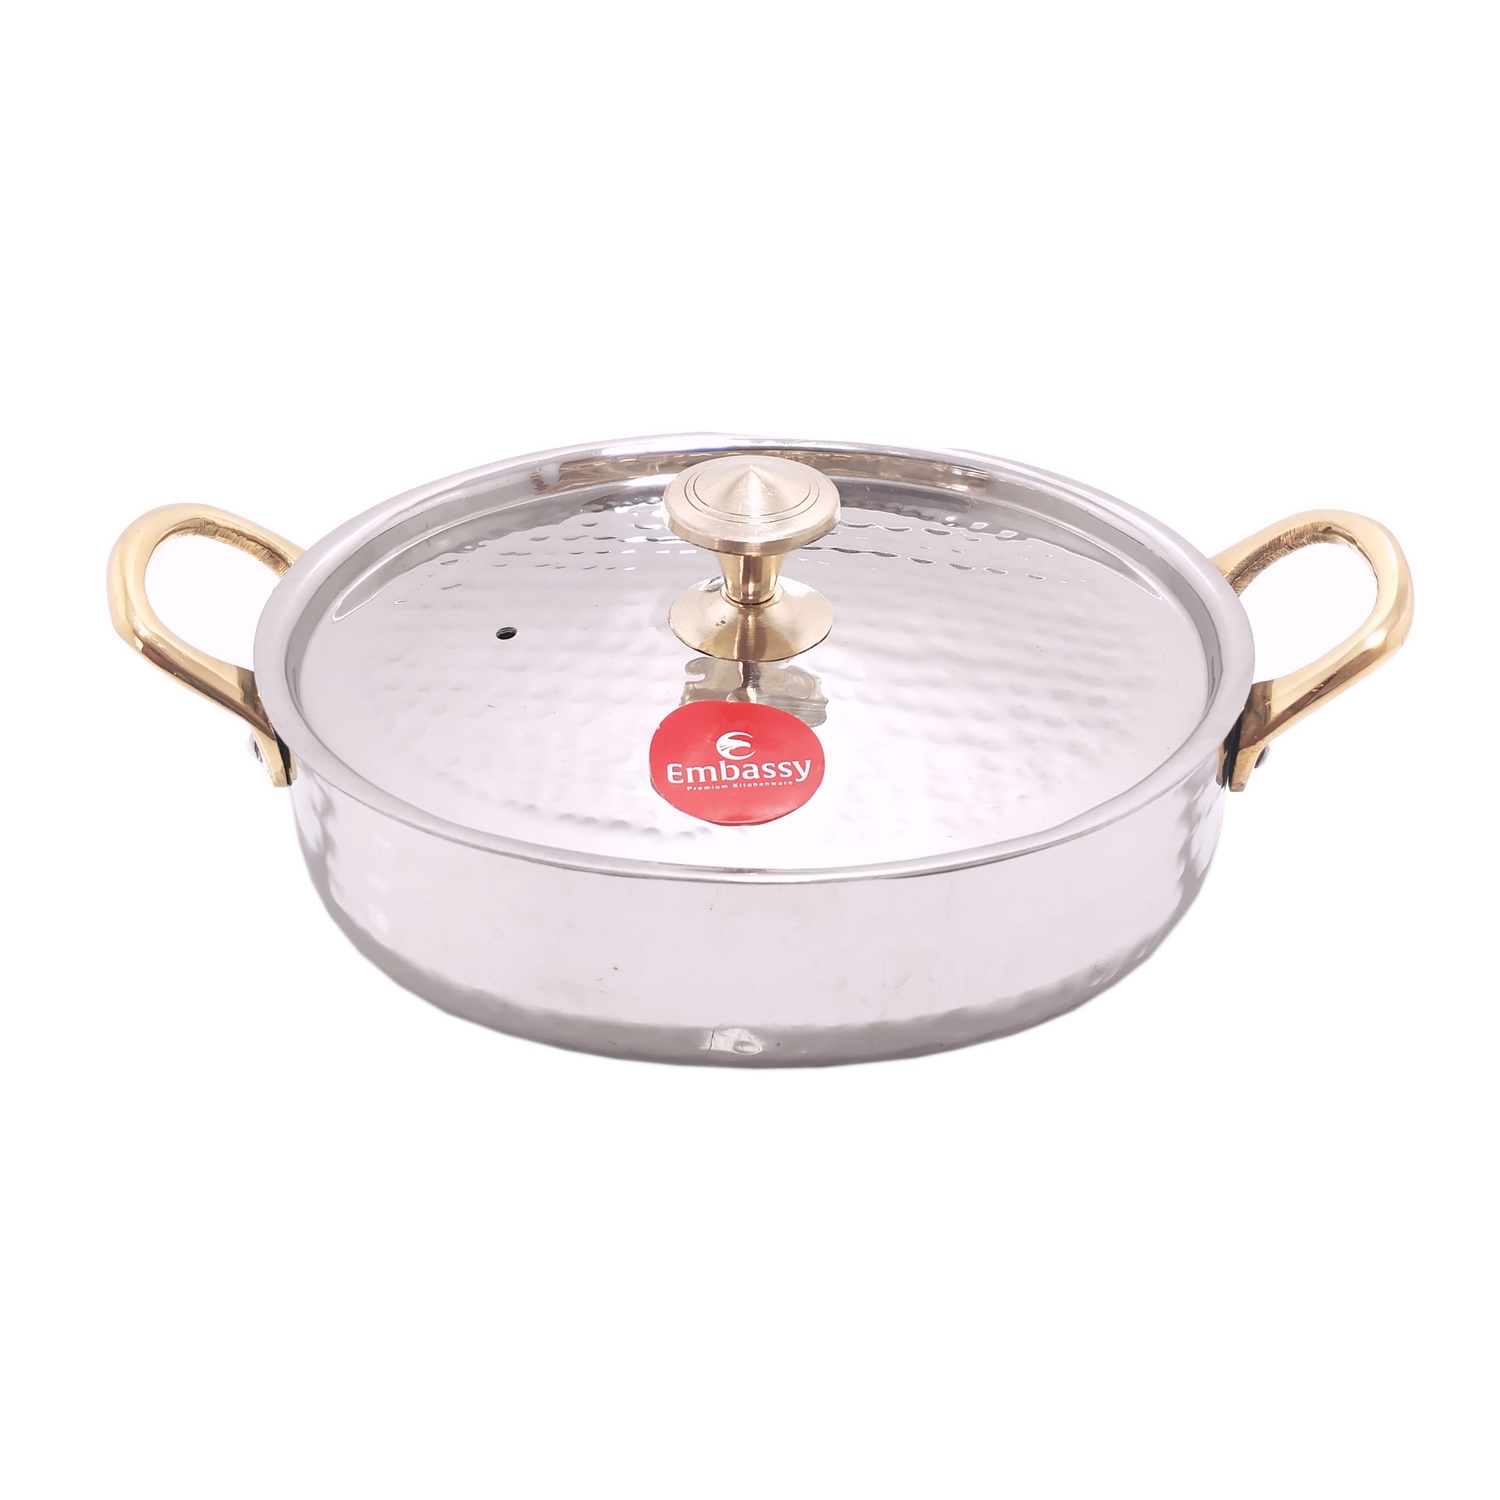 Embassy Serving Kadhai Round Hammered With Lid Size 01